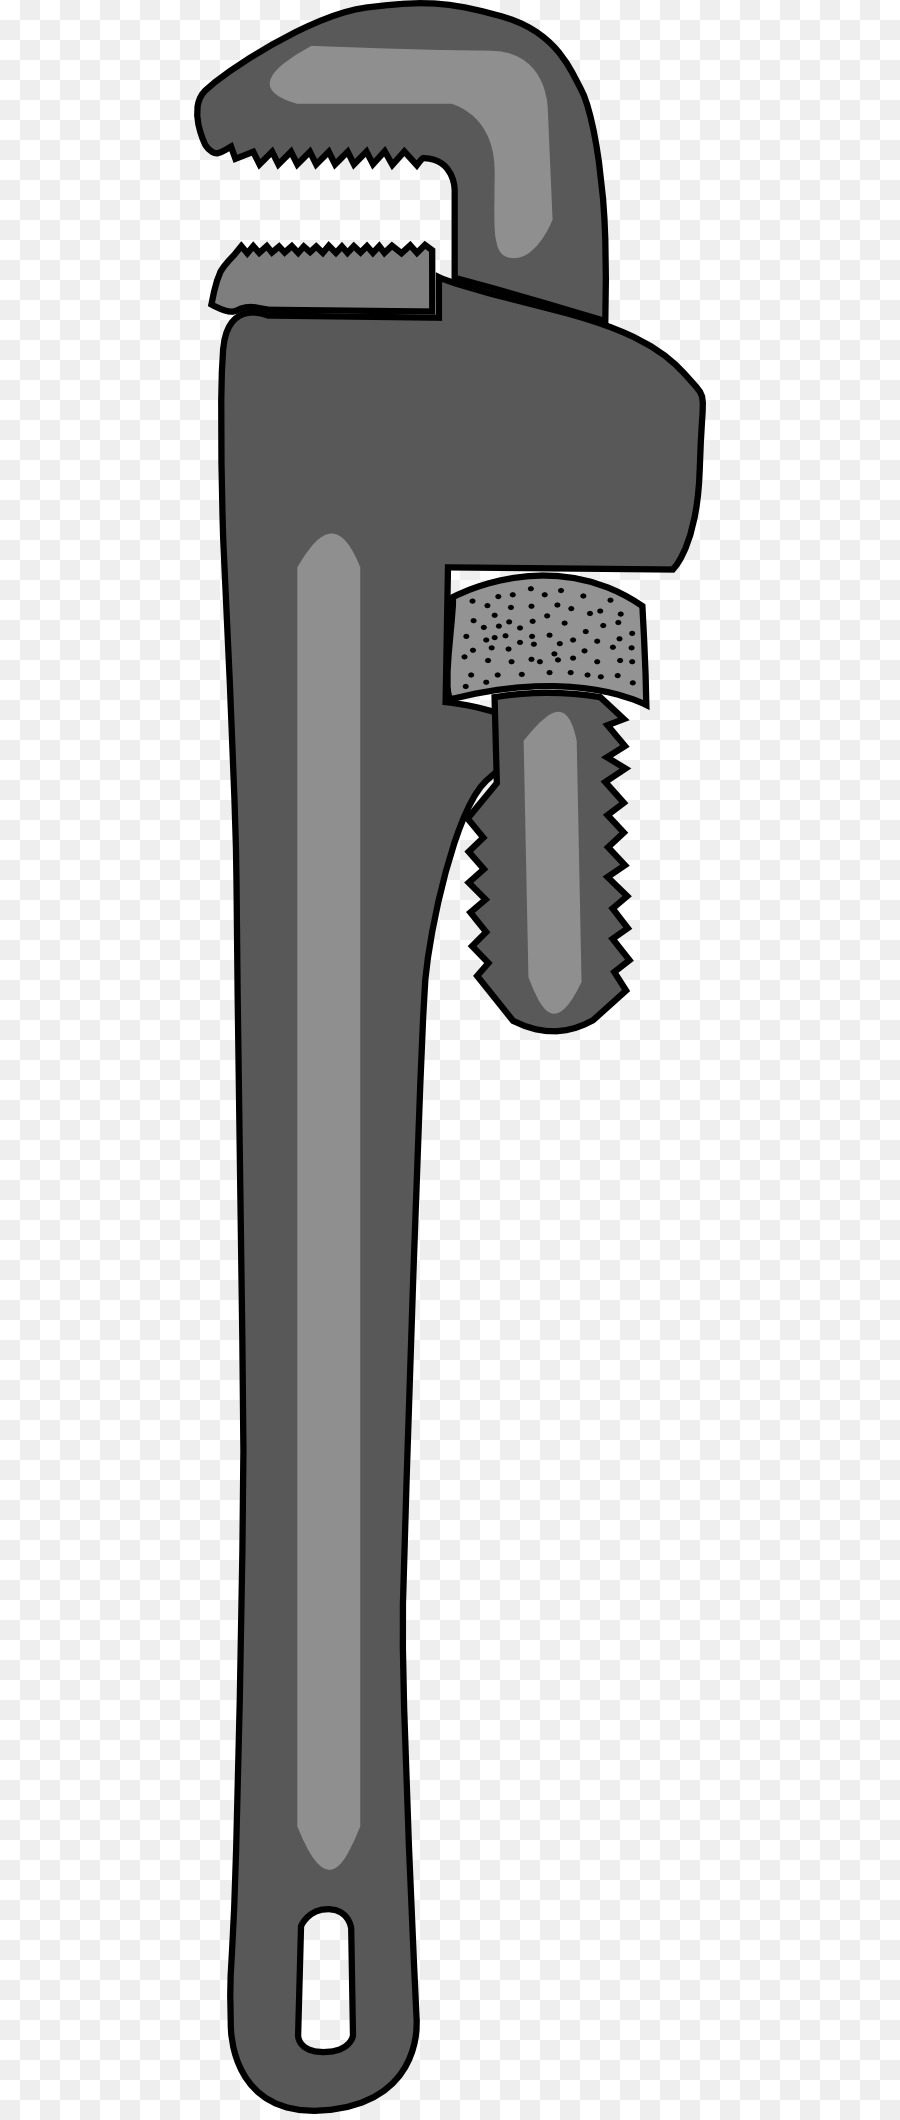 Pipe wrench Plumber wrench Plumbing Clip art - Plumber Pipes Cliparts png download - 512*2114 - Free Transparent Pipe Wrench png Download.